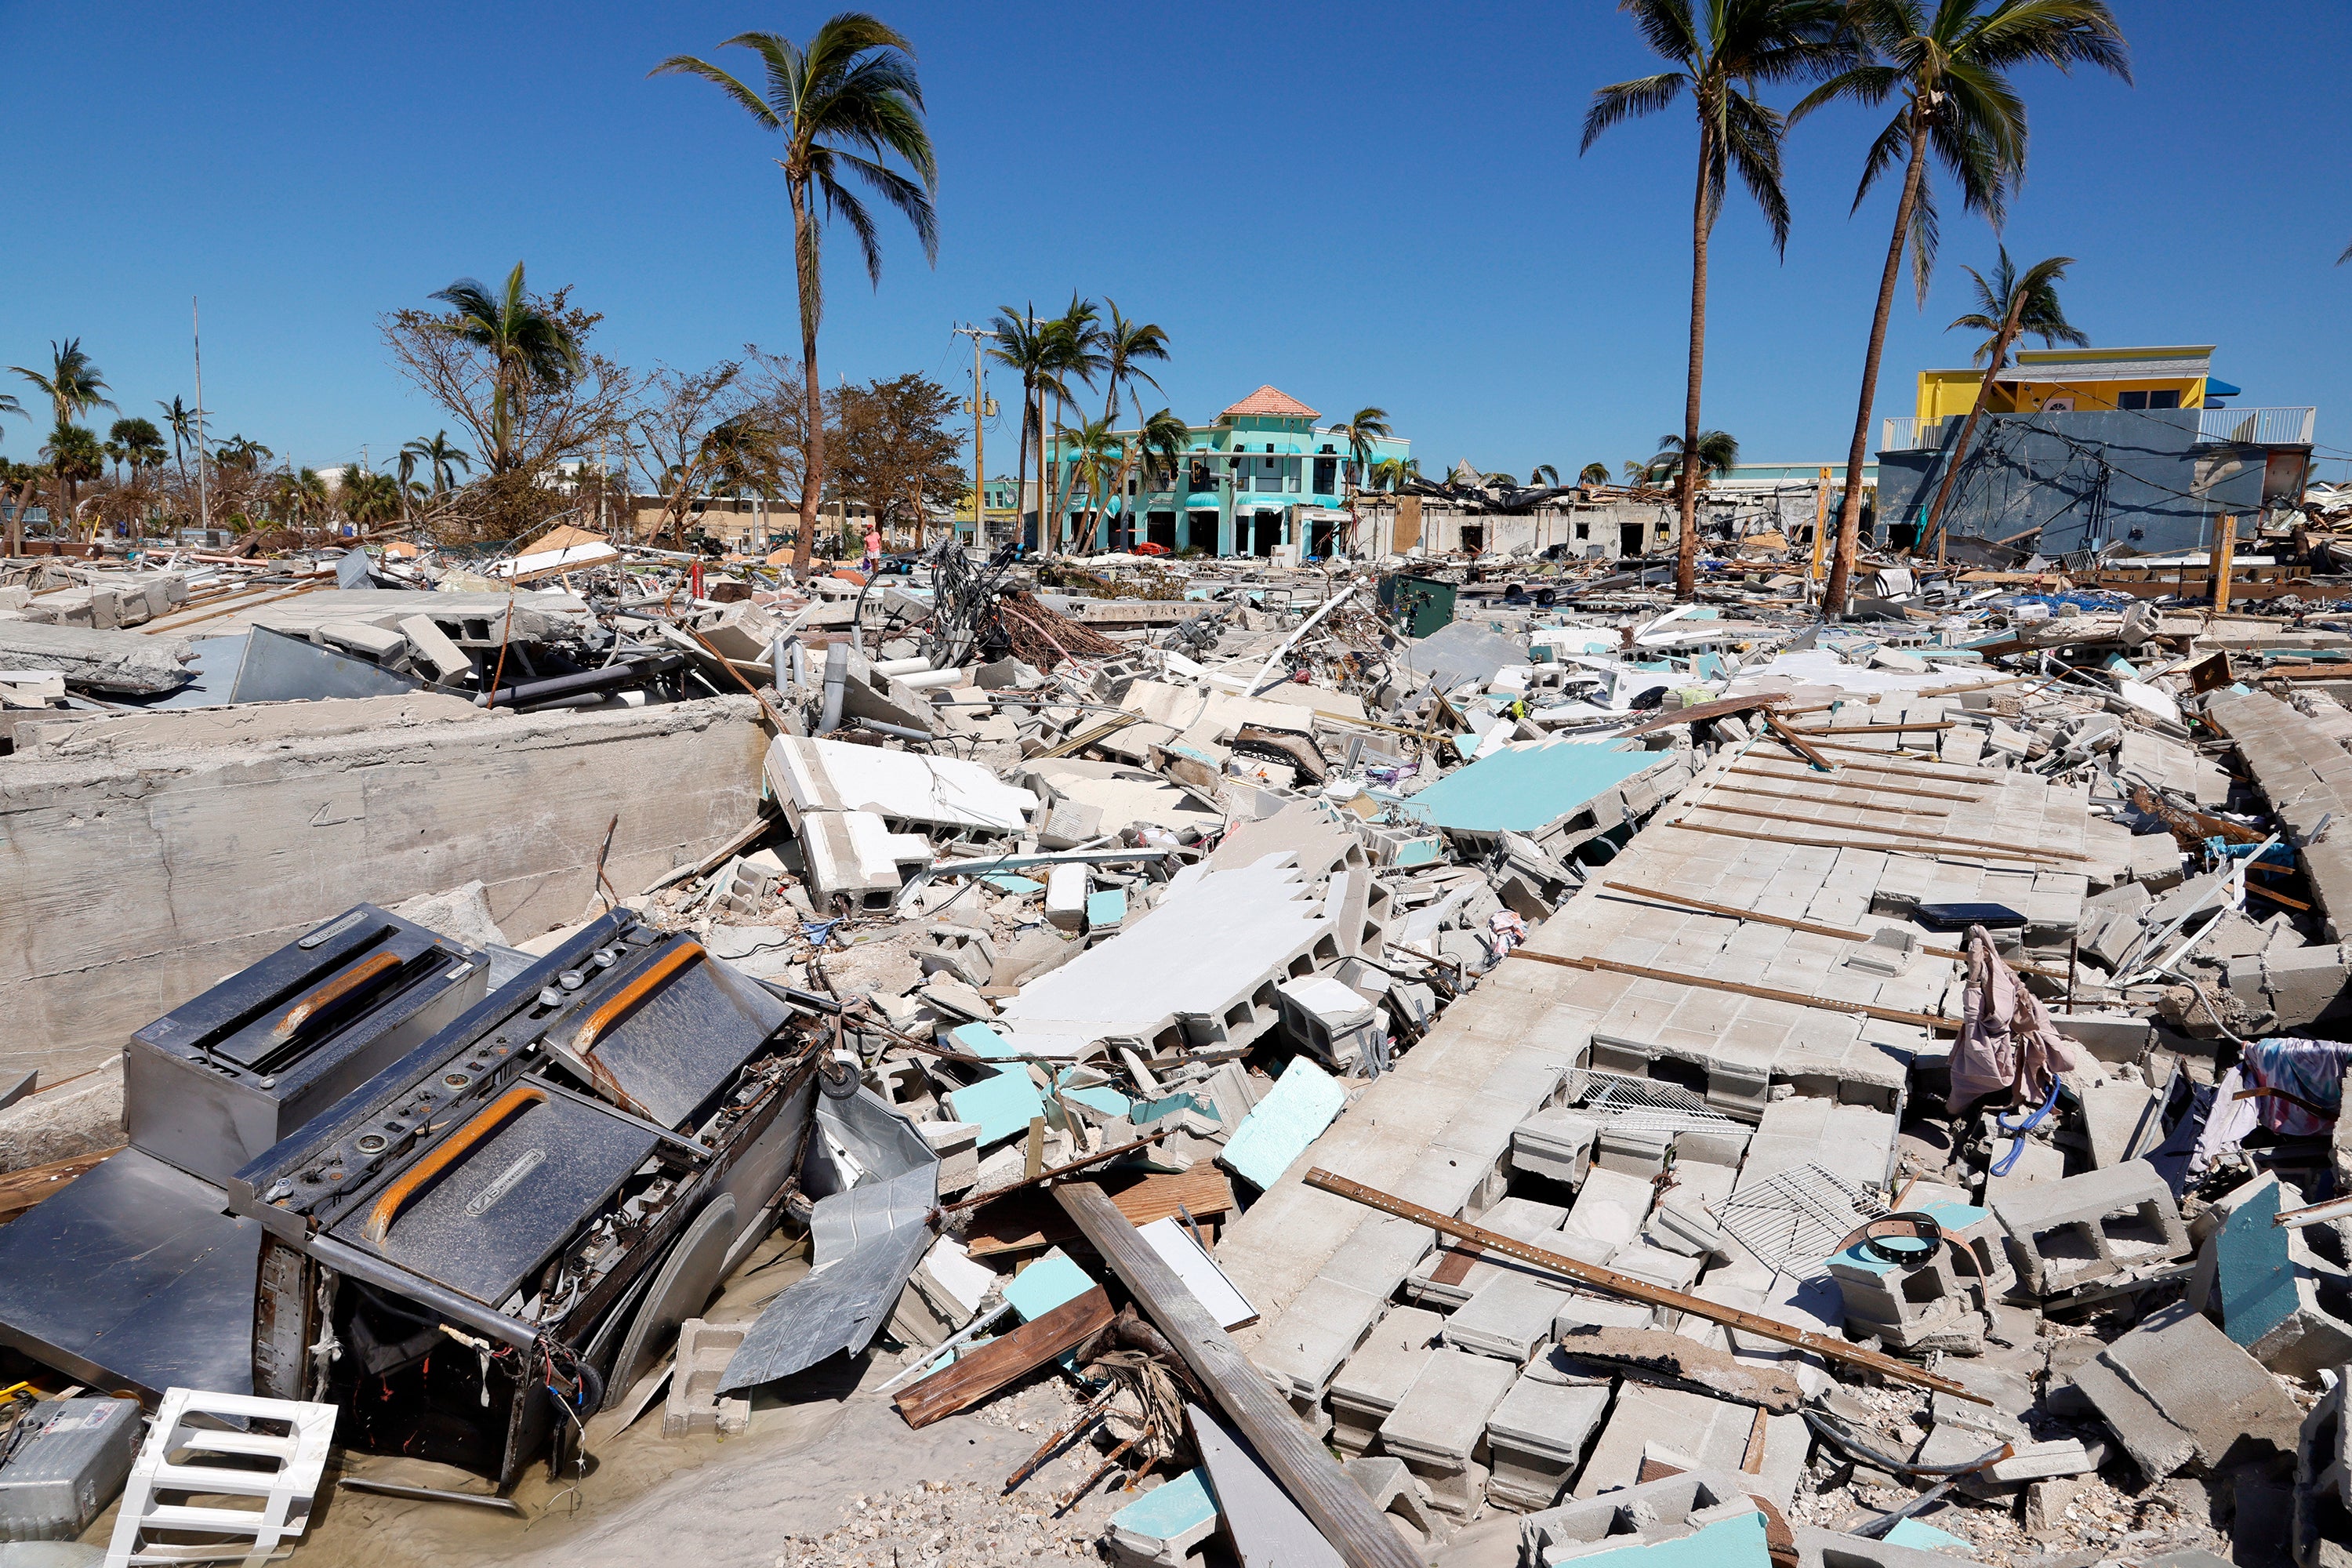 The Times Square area near the Lynn Hall Pier has been reduced to rubble on the island of Fort Myers Beach, Florida